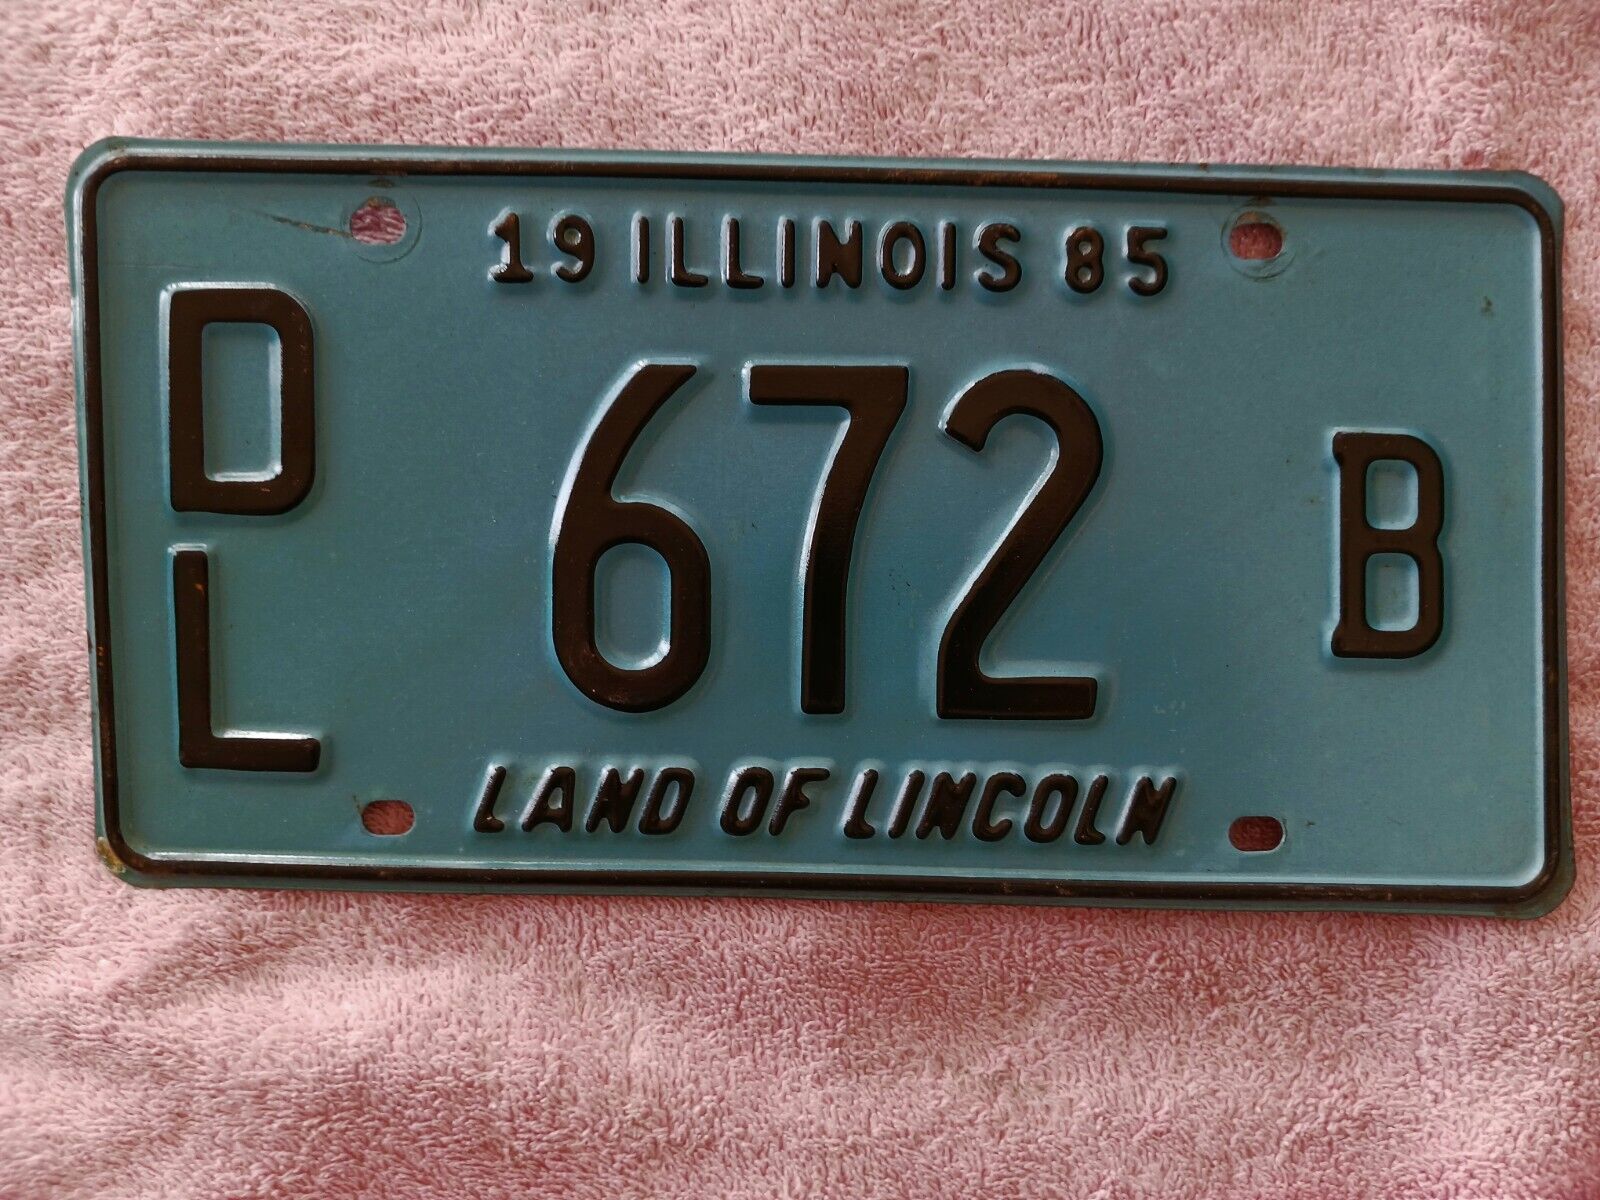 1985 Illinois IL License DL 672 B Land of Lincoln